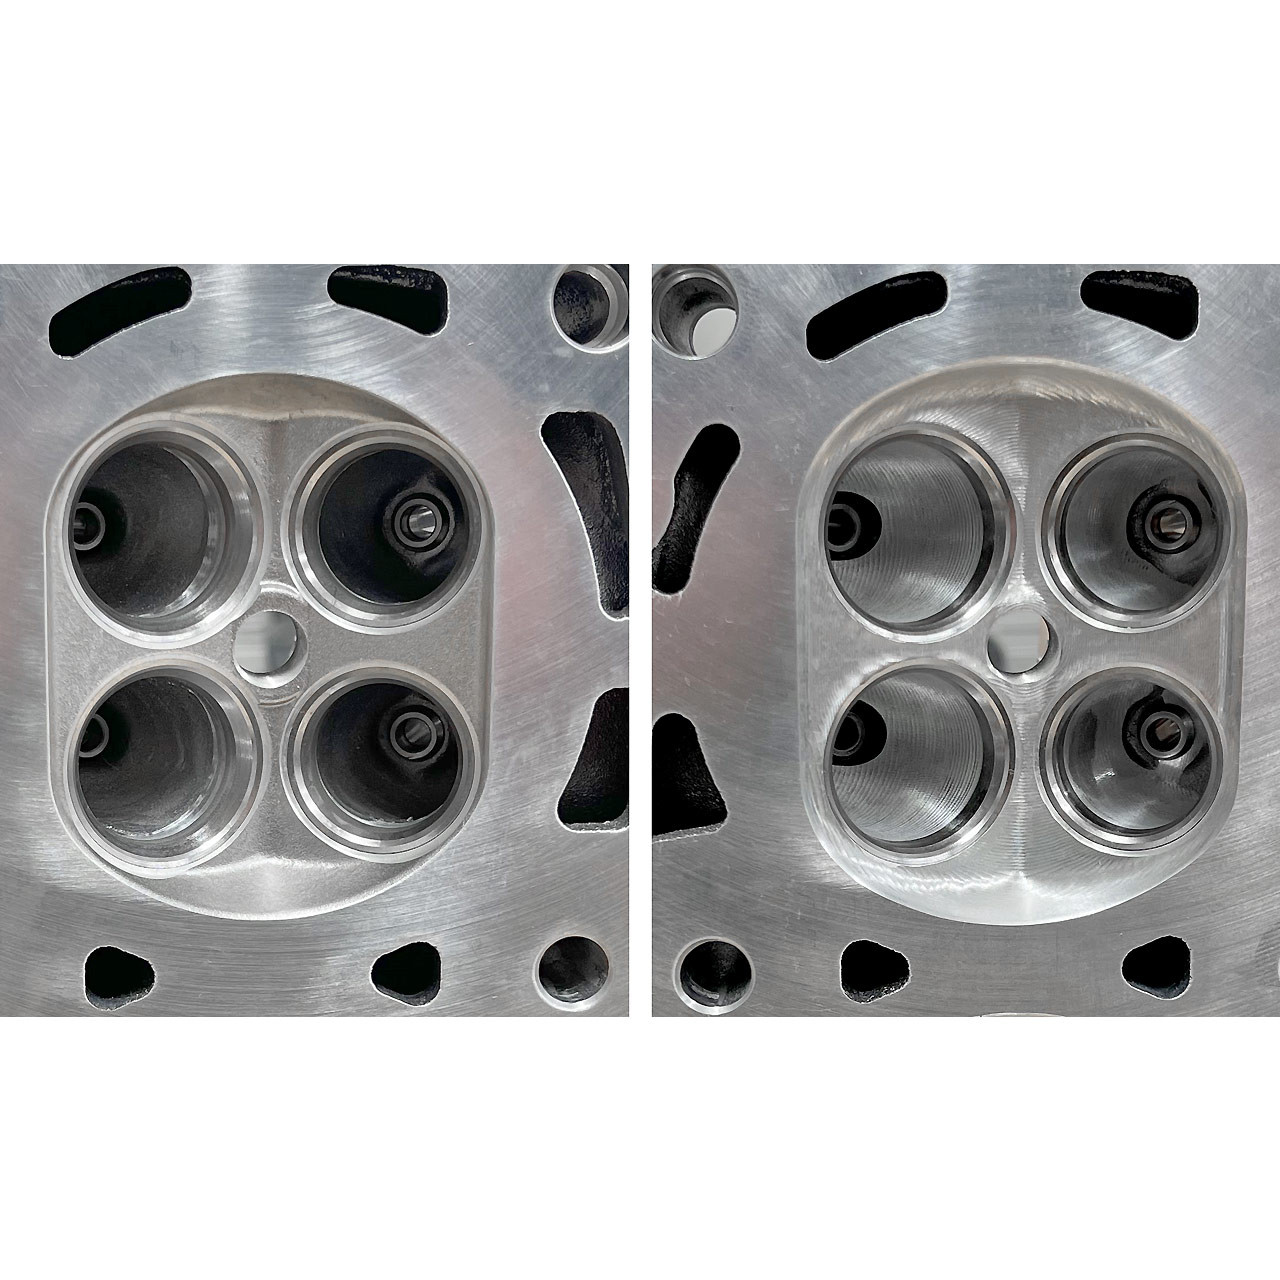 IAG 950 S20 Cylinder Head Combustion Modification Comparision